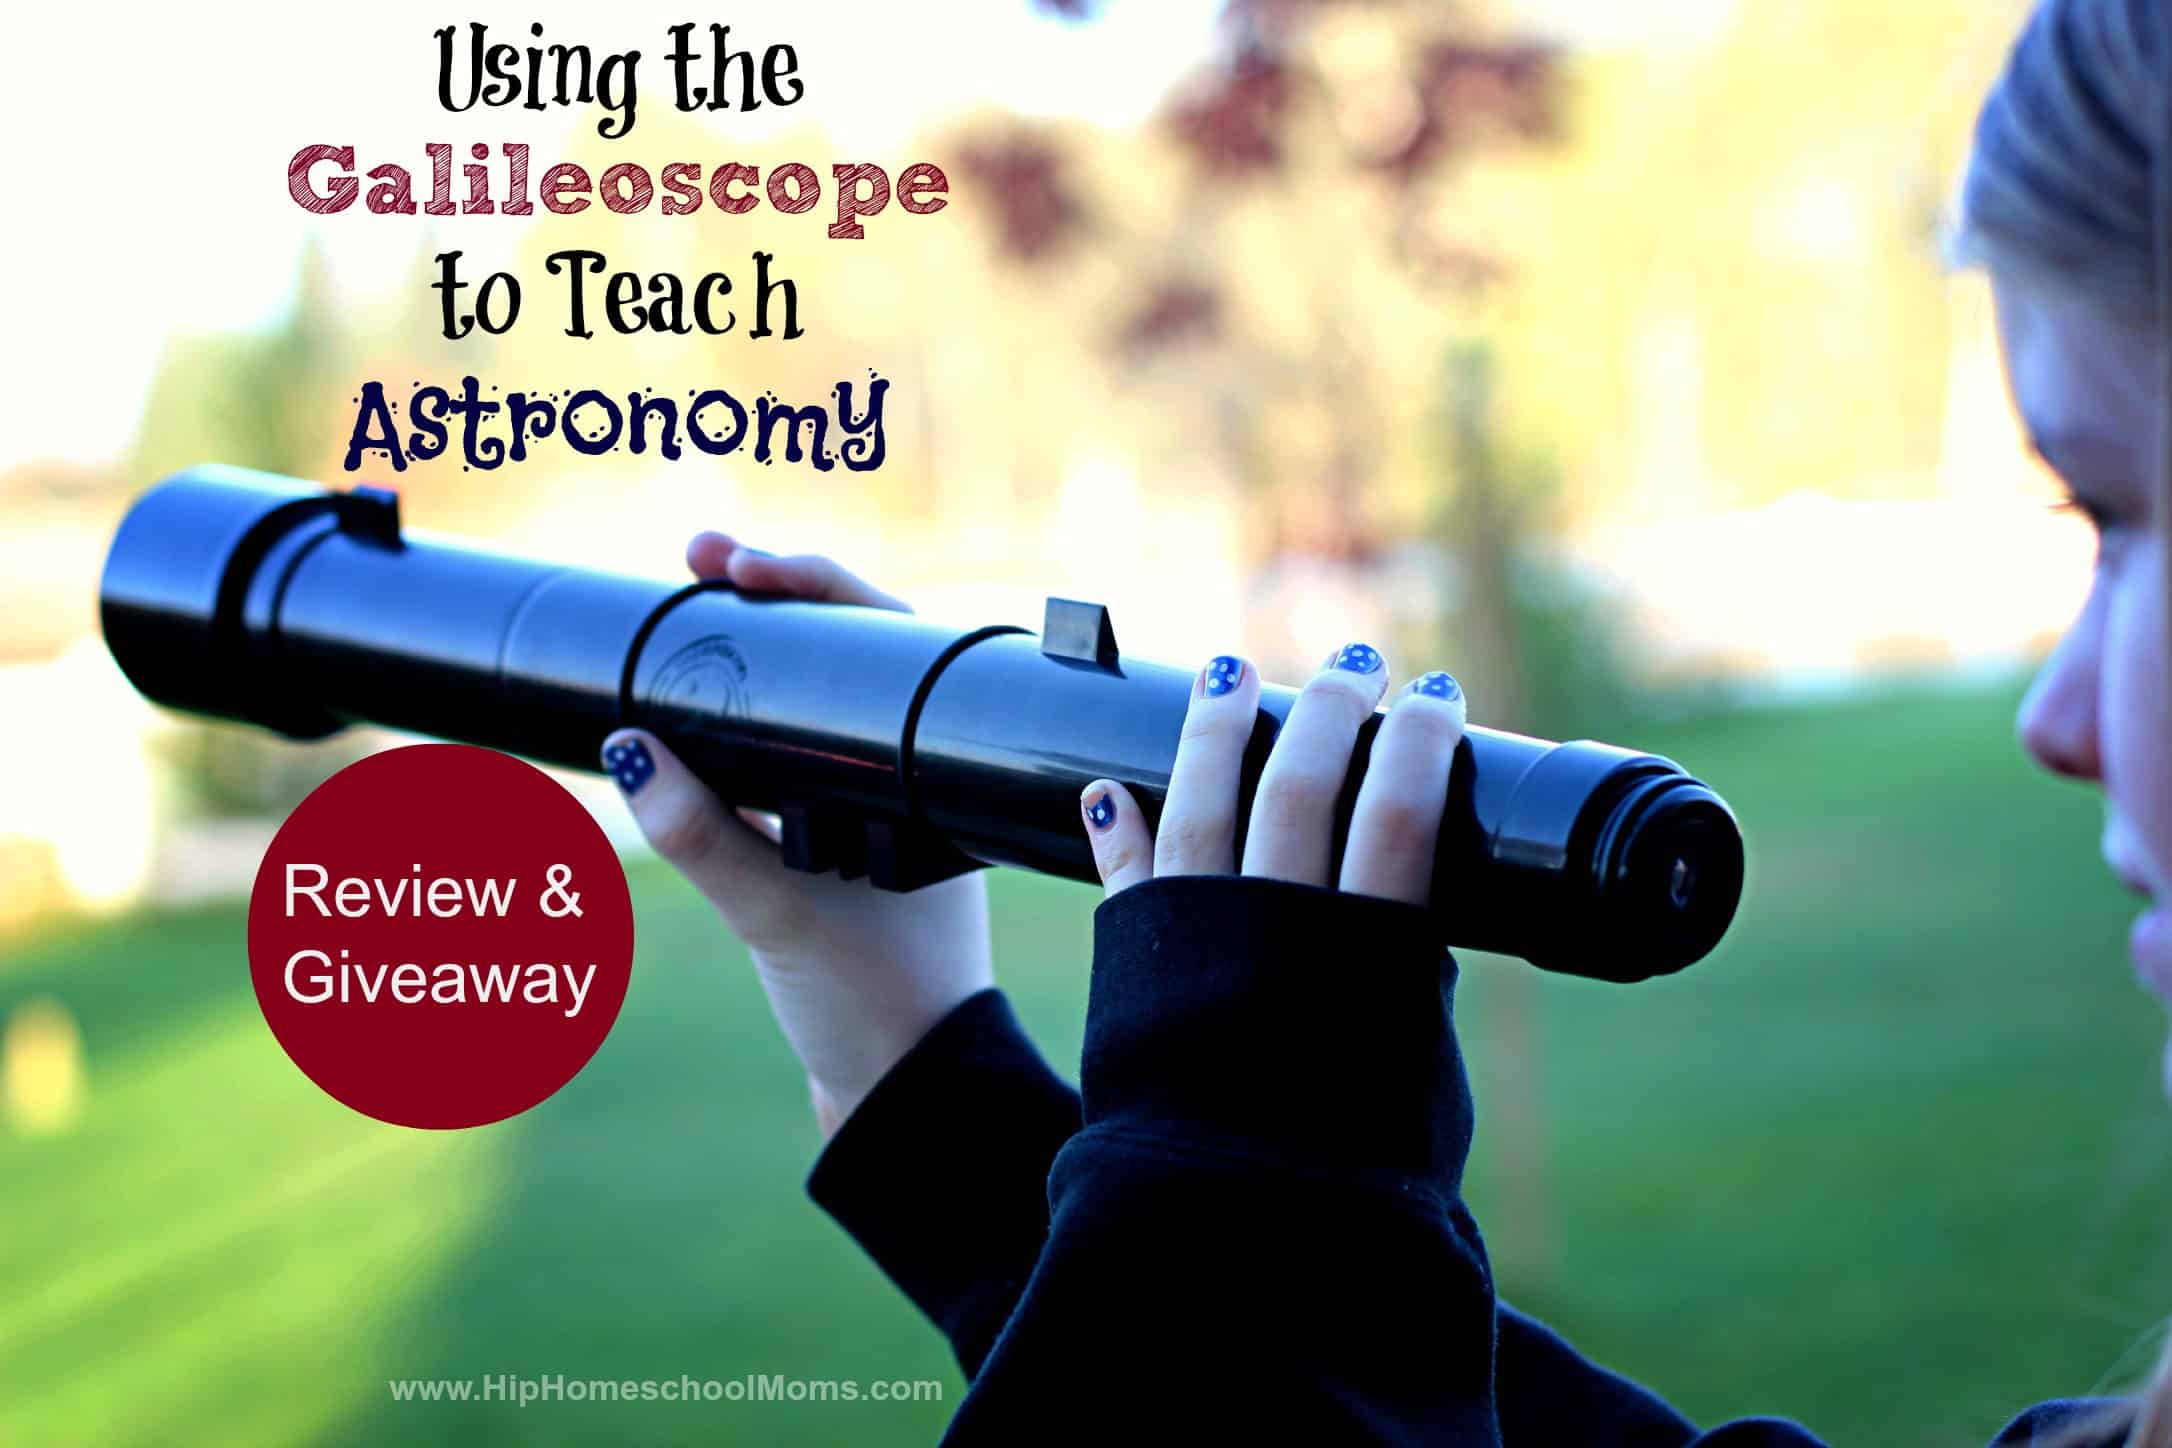 Using the Galileoscope to Teach Astronomy Review & Giveaway {closed}